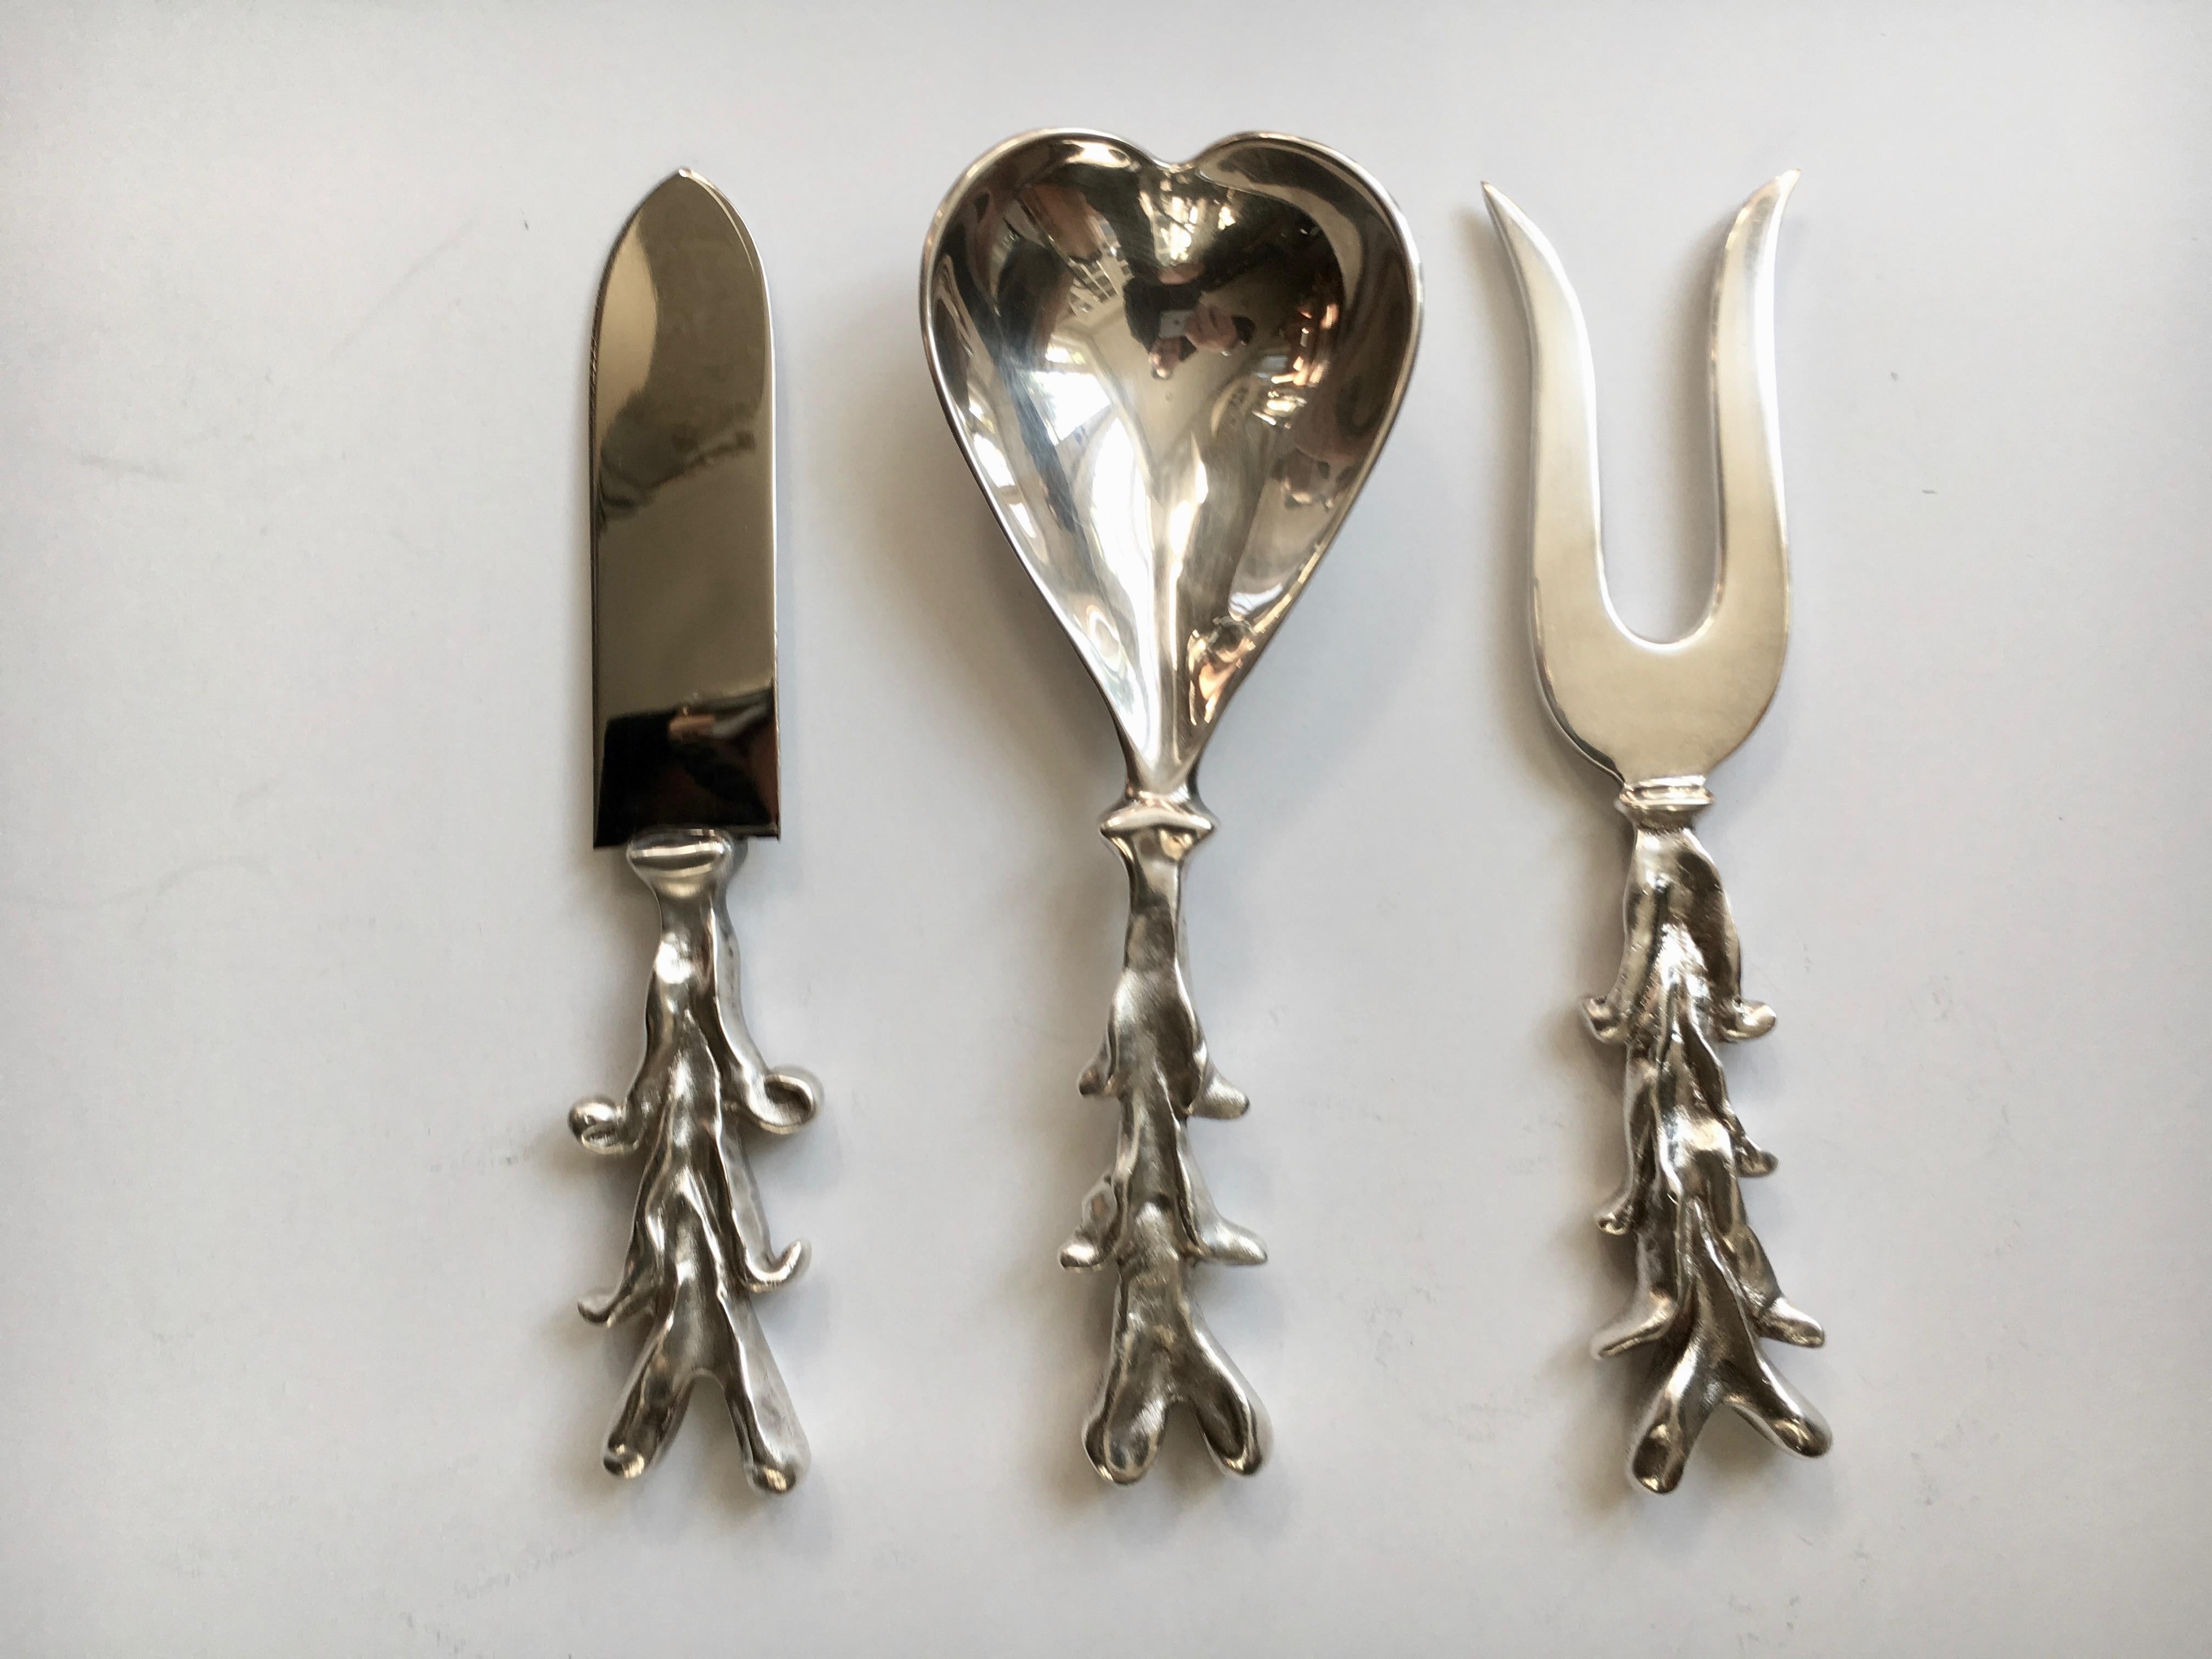 Cleaver design by Michael Aram - serving pieces in silver plate that say I 'LOVE' U.

Perfect for your Chef 